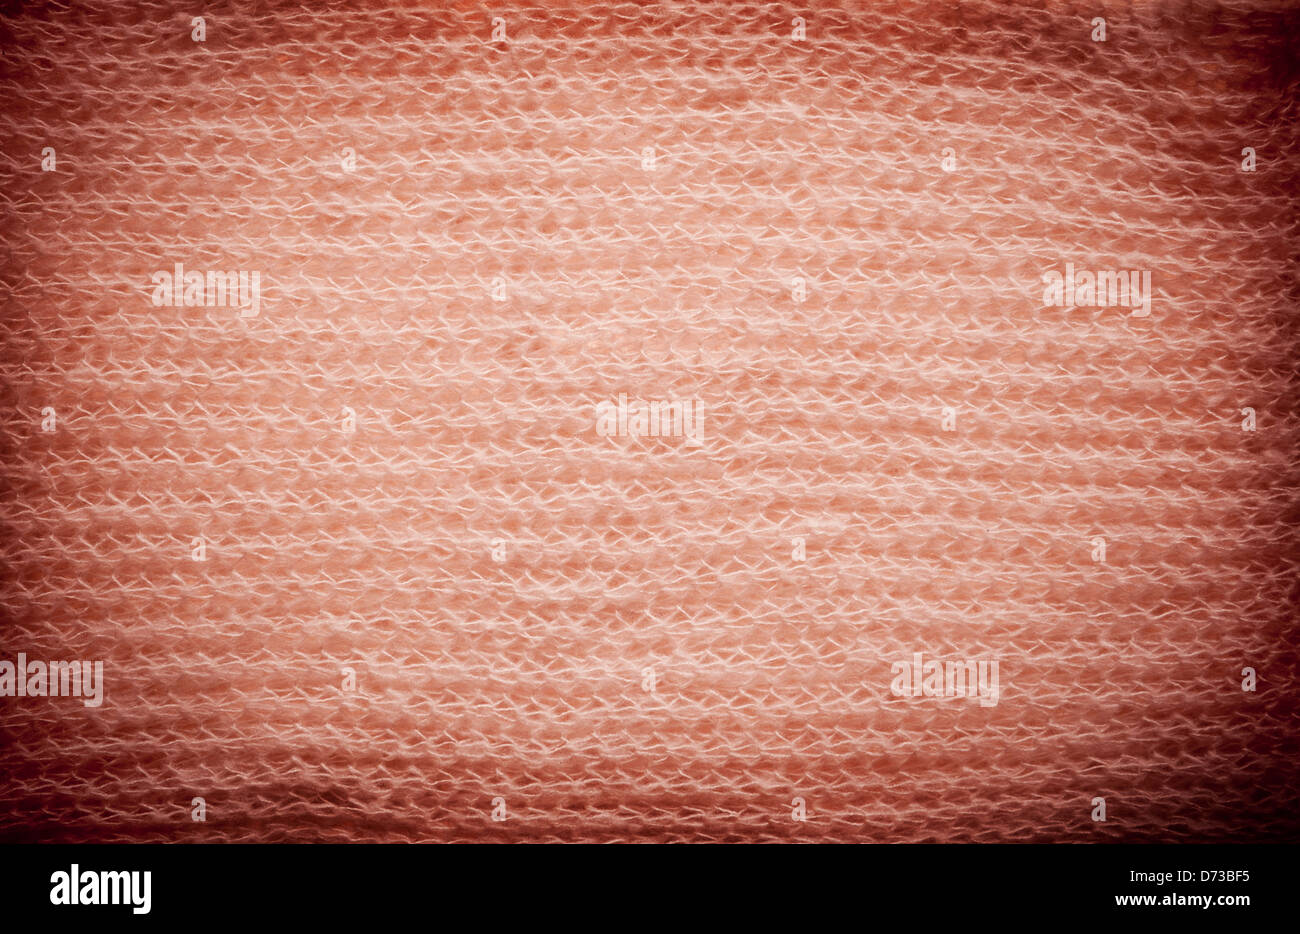 Sepia fuzzy knitted fabric texture abstract Stock Photo